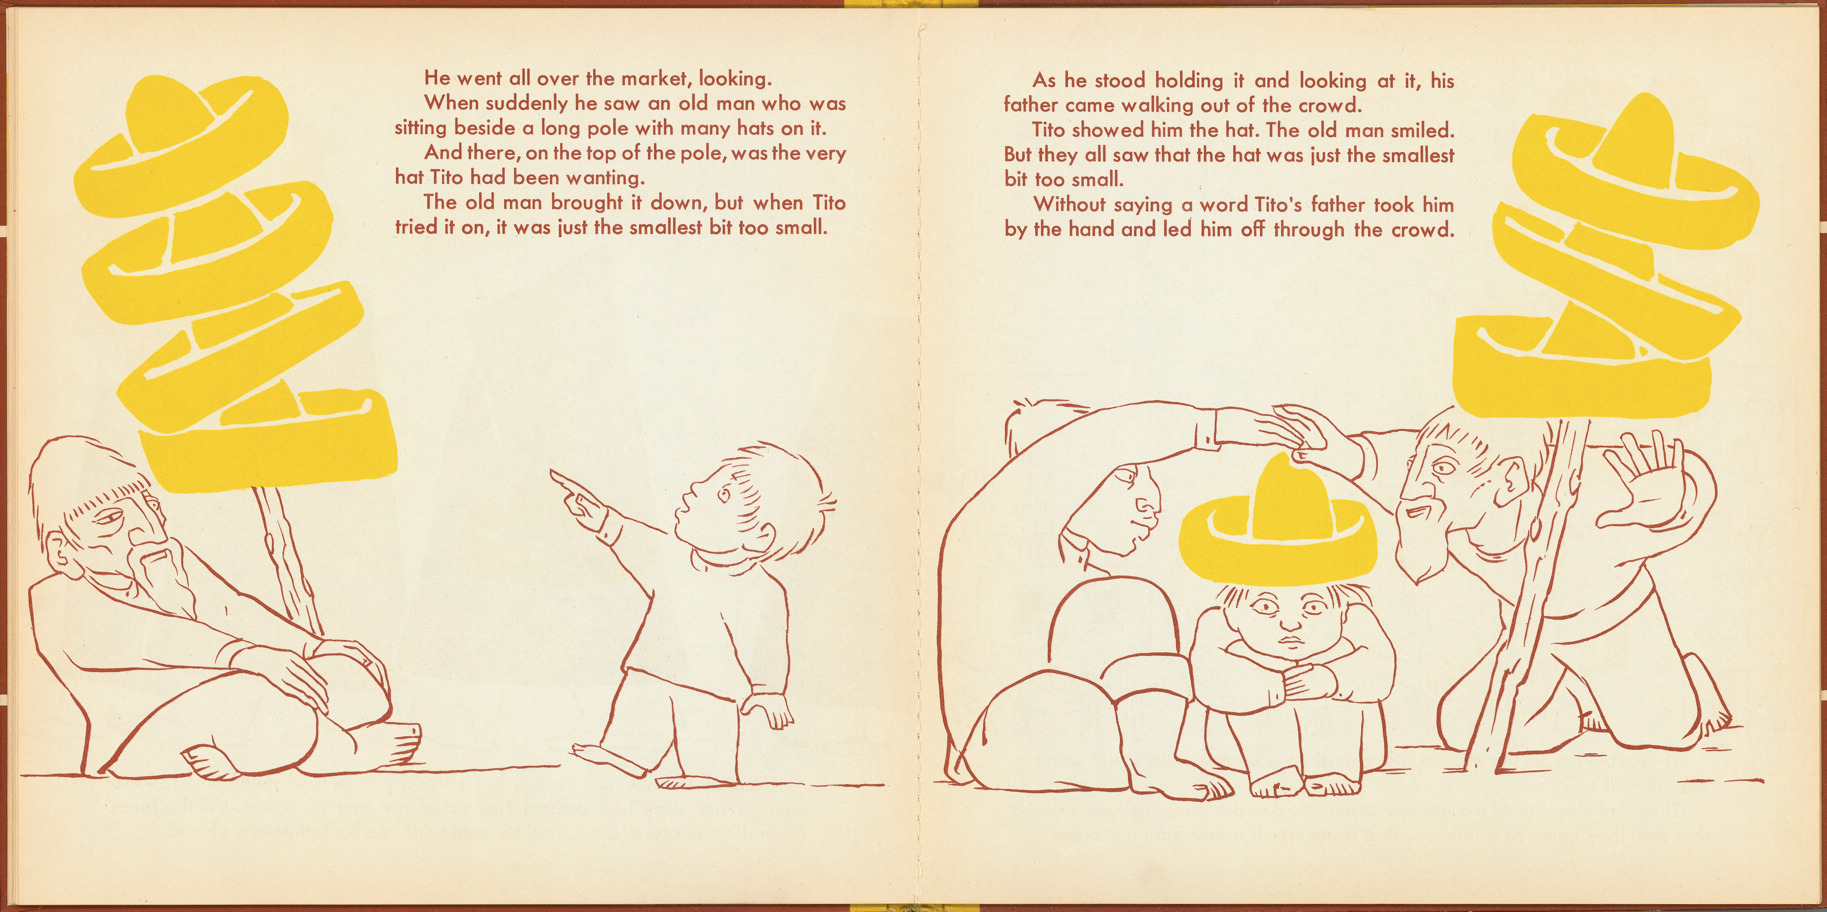 Pages 14–15 of 'Tito's Hats' written by Melchor G. Ferrer.  Illustrations by Jean Charlot.